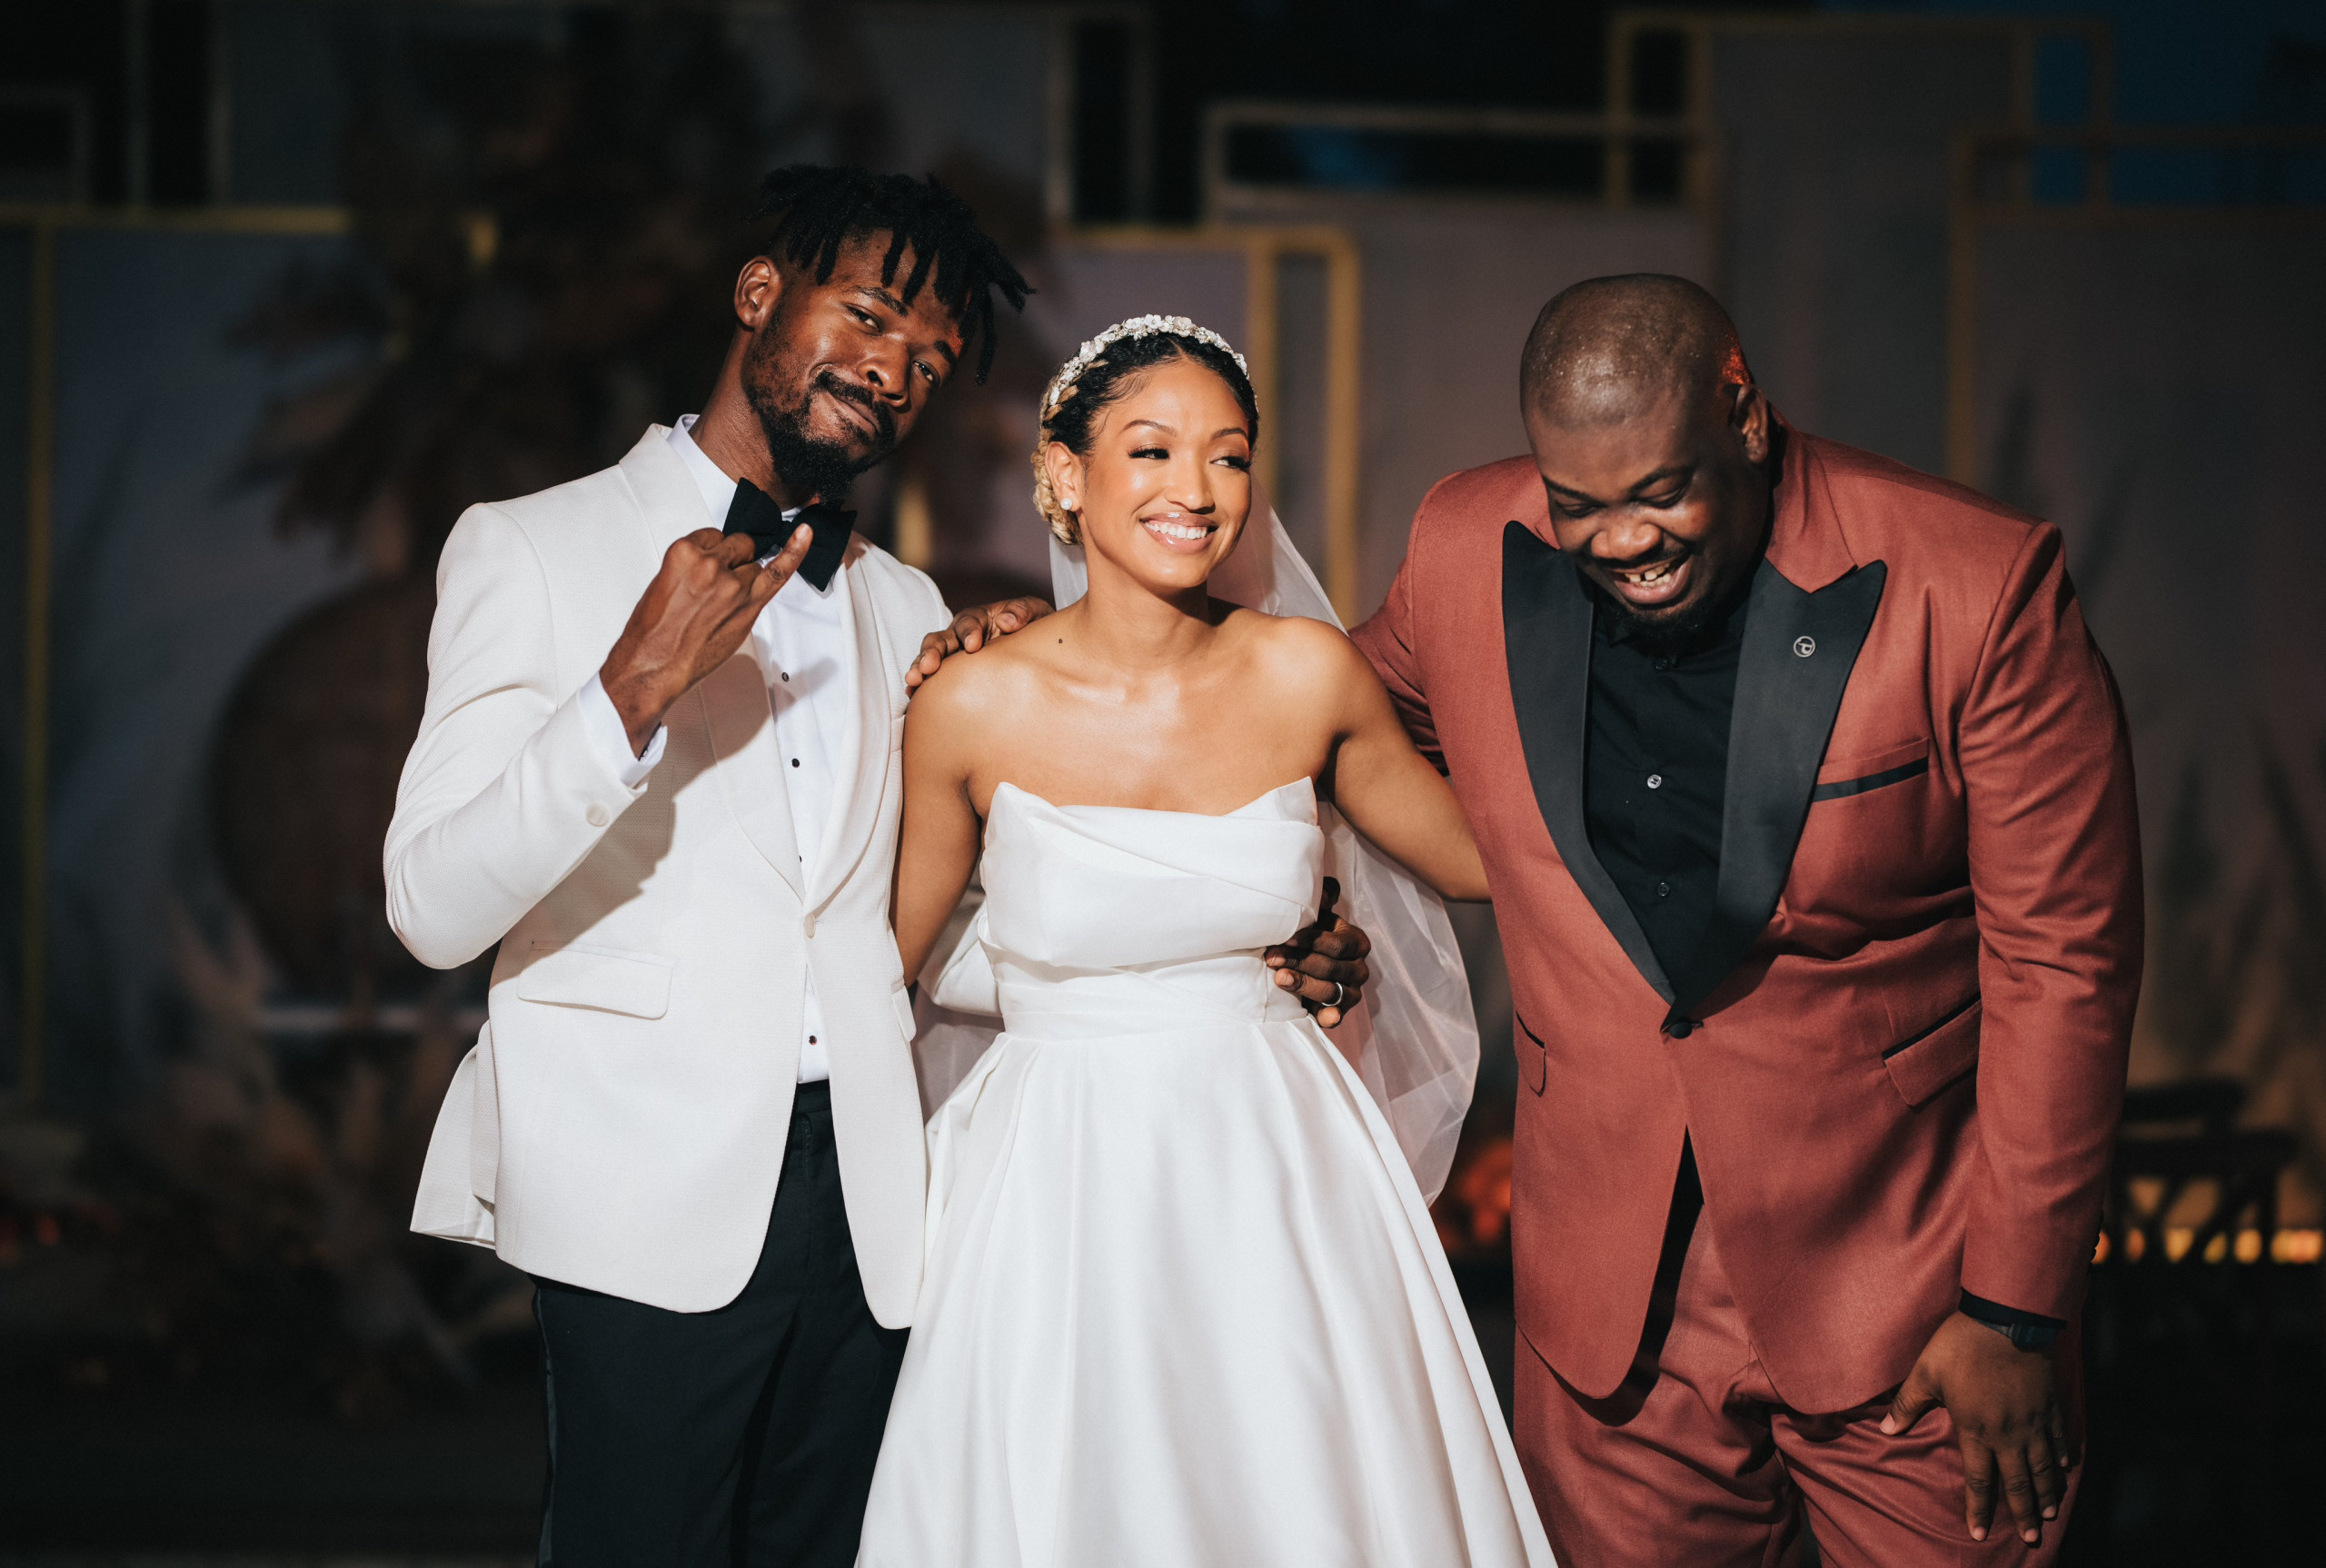 Photos Of Johnny Drille’s Secret Wedding Surfaces